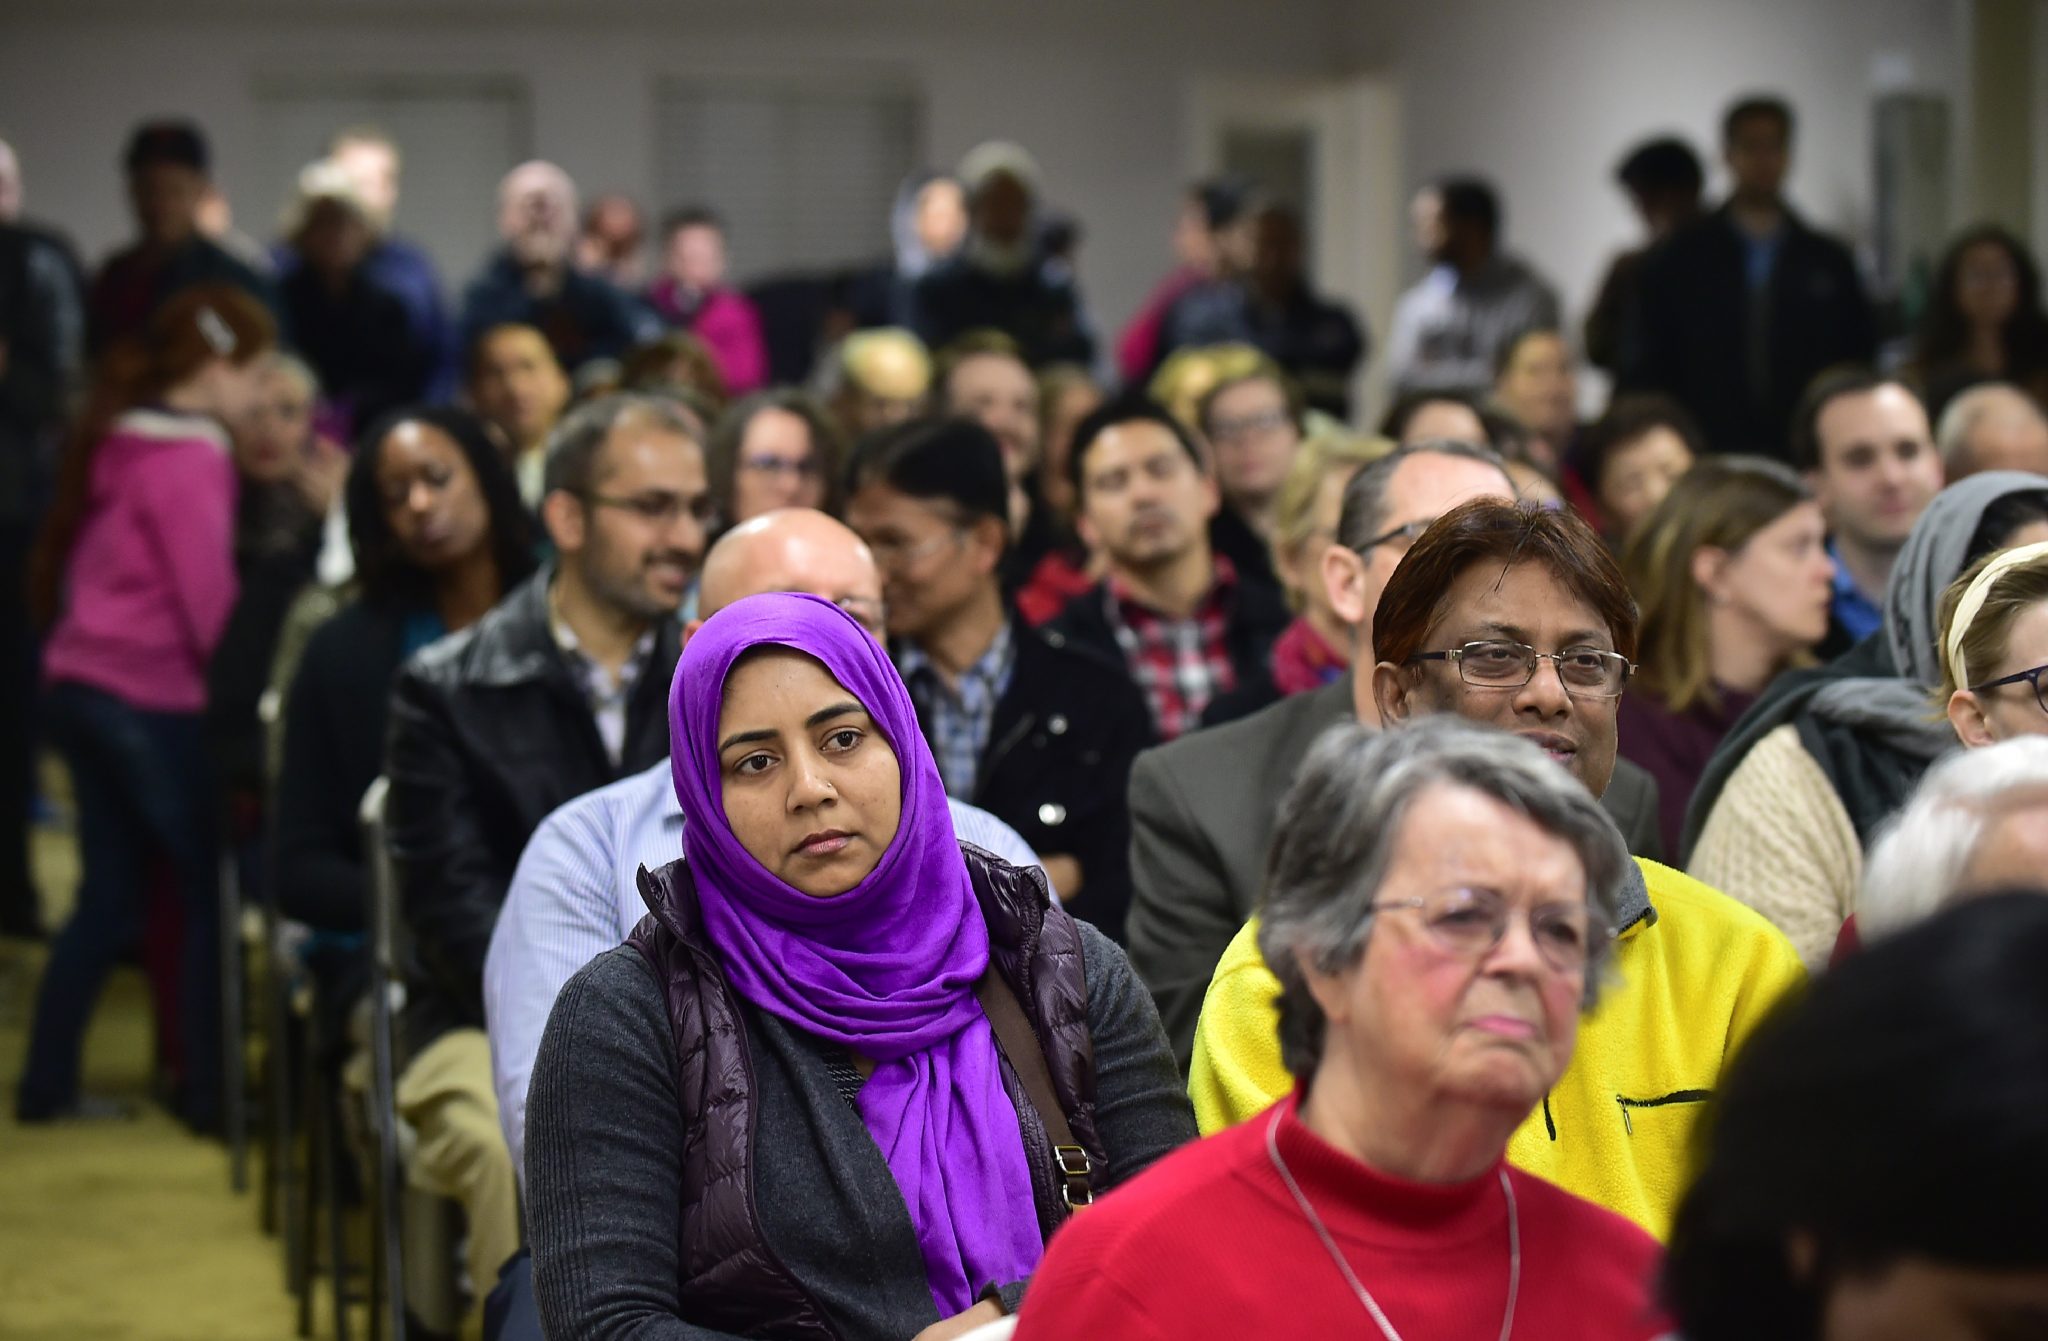 People attend an interfaith solidarity event at Masjid Gibrael Mosque in San Gabriel, California on January 26, 2017, where religious and community leaders denounced hate speech and anti-Muslim proposals that have contributed to a rise in anti-Muslim rhetoric and crime. President Donald Trump is reportedly poised to suspend the US refugee program for four months and halt visas for travellers from seven Muslim countries. A draft executive order published in the Washington Post and New York Times said refugees from war-torn Syria will be indefinitely banned, while the broader US refugee admissions program will be suspended for 120 days as officials draw up a list of low risk countries. / AFP PHOTO / Frederic J. BROWN